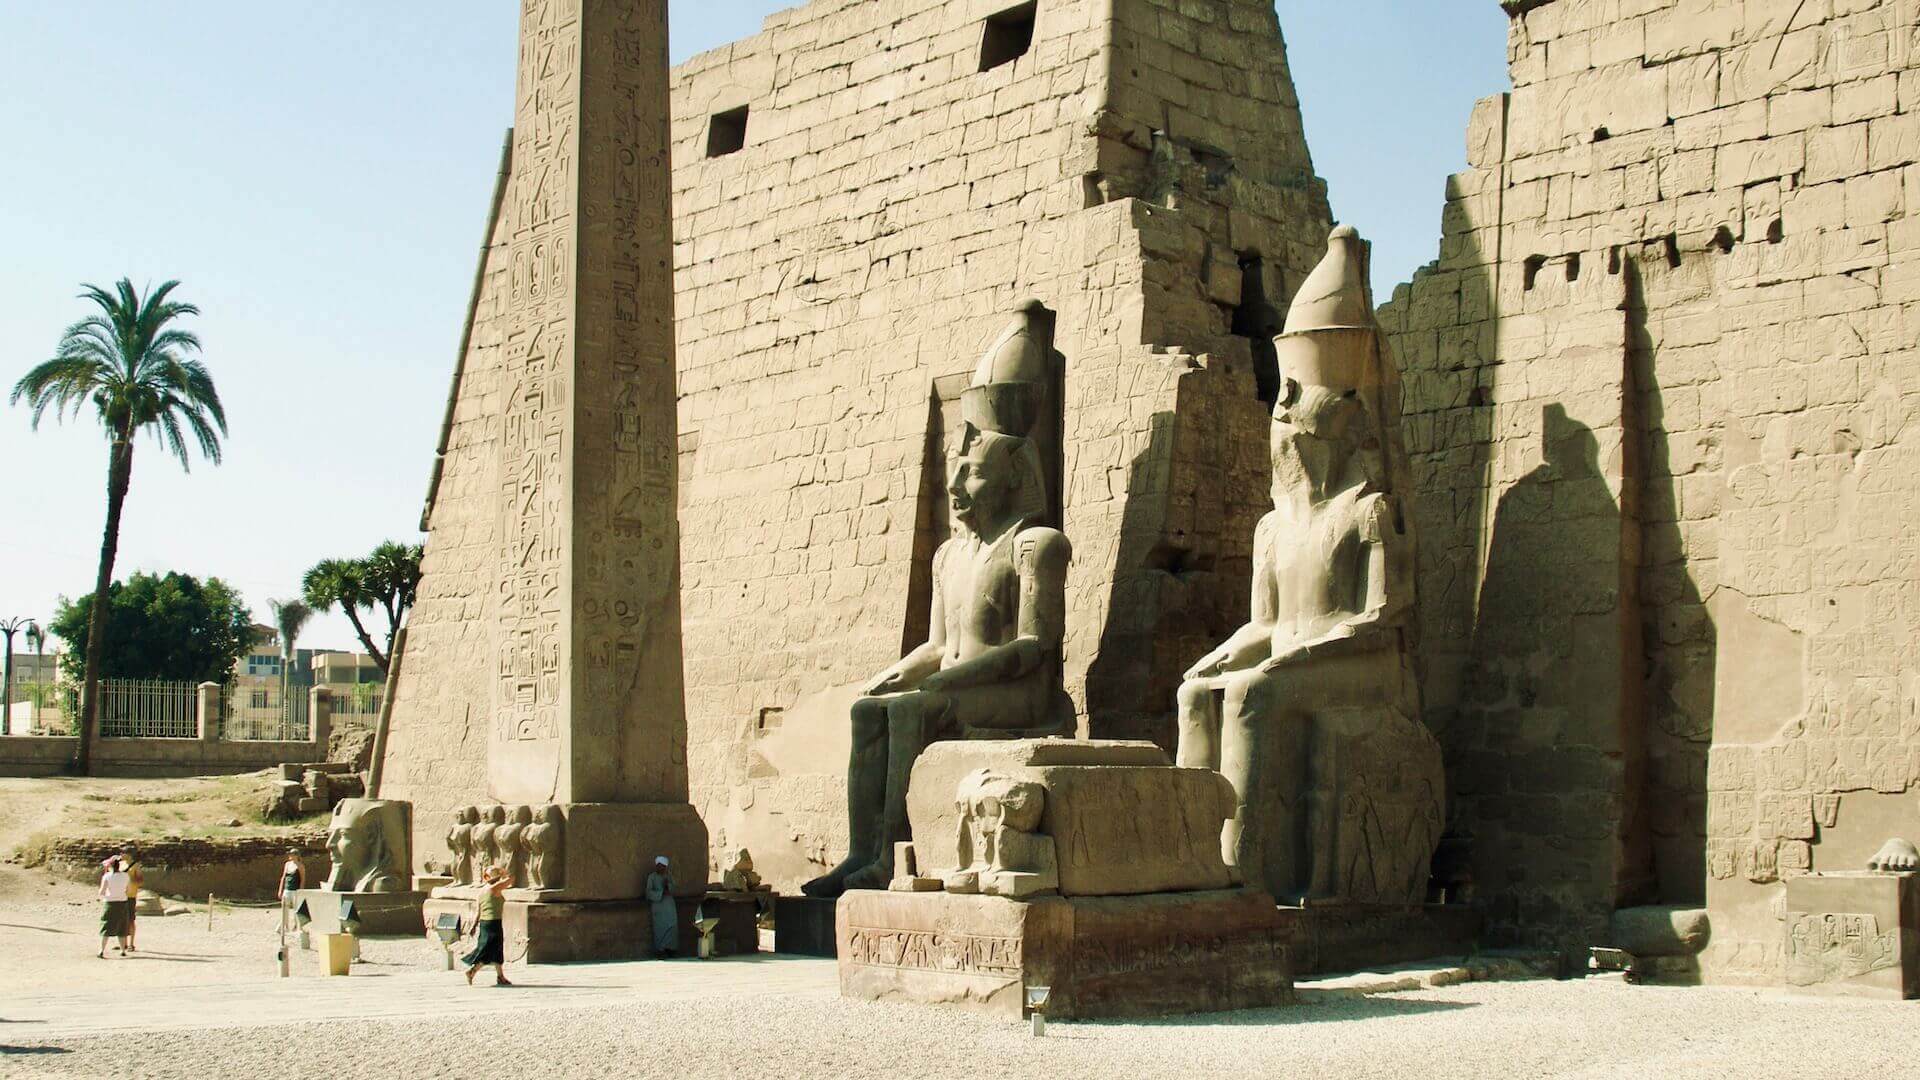 luxor temple in egypt, one of the oldest temples in the world